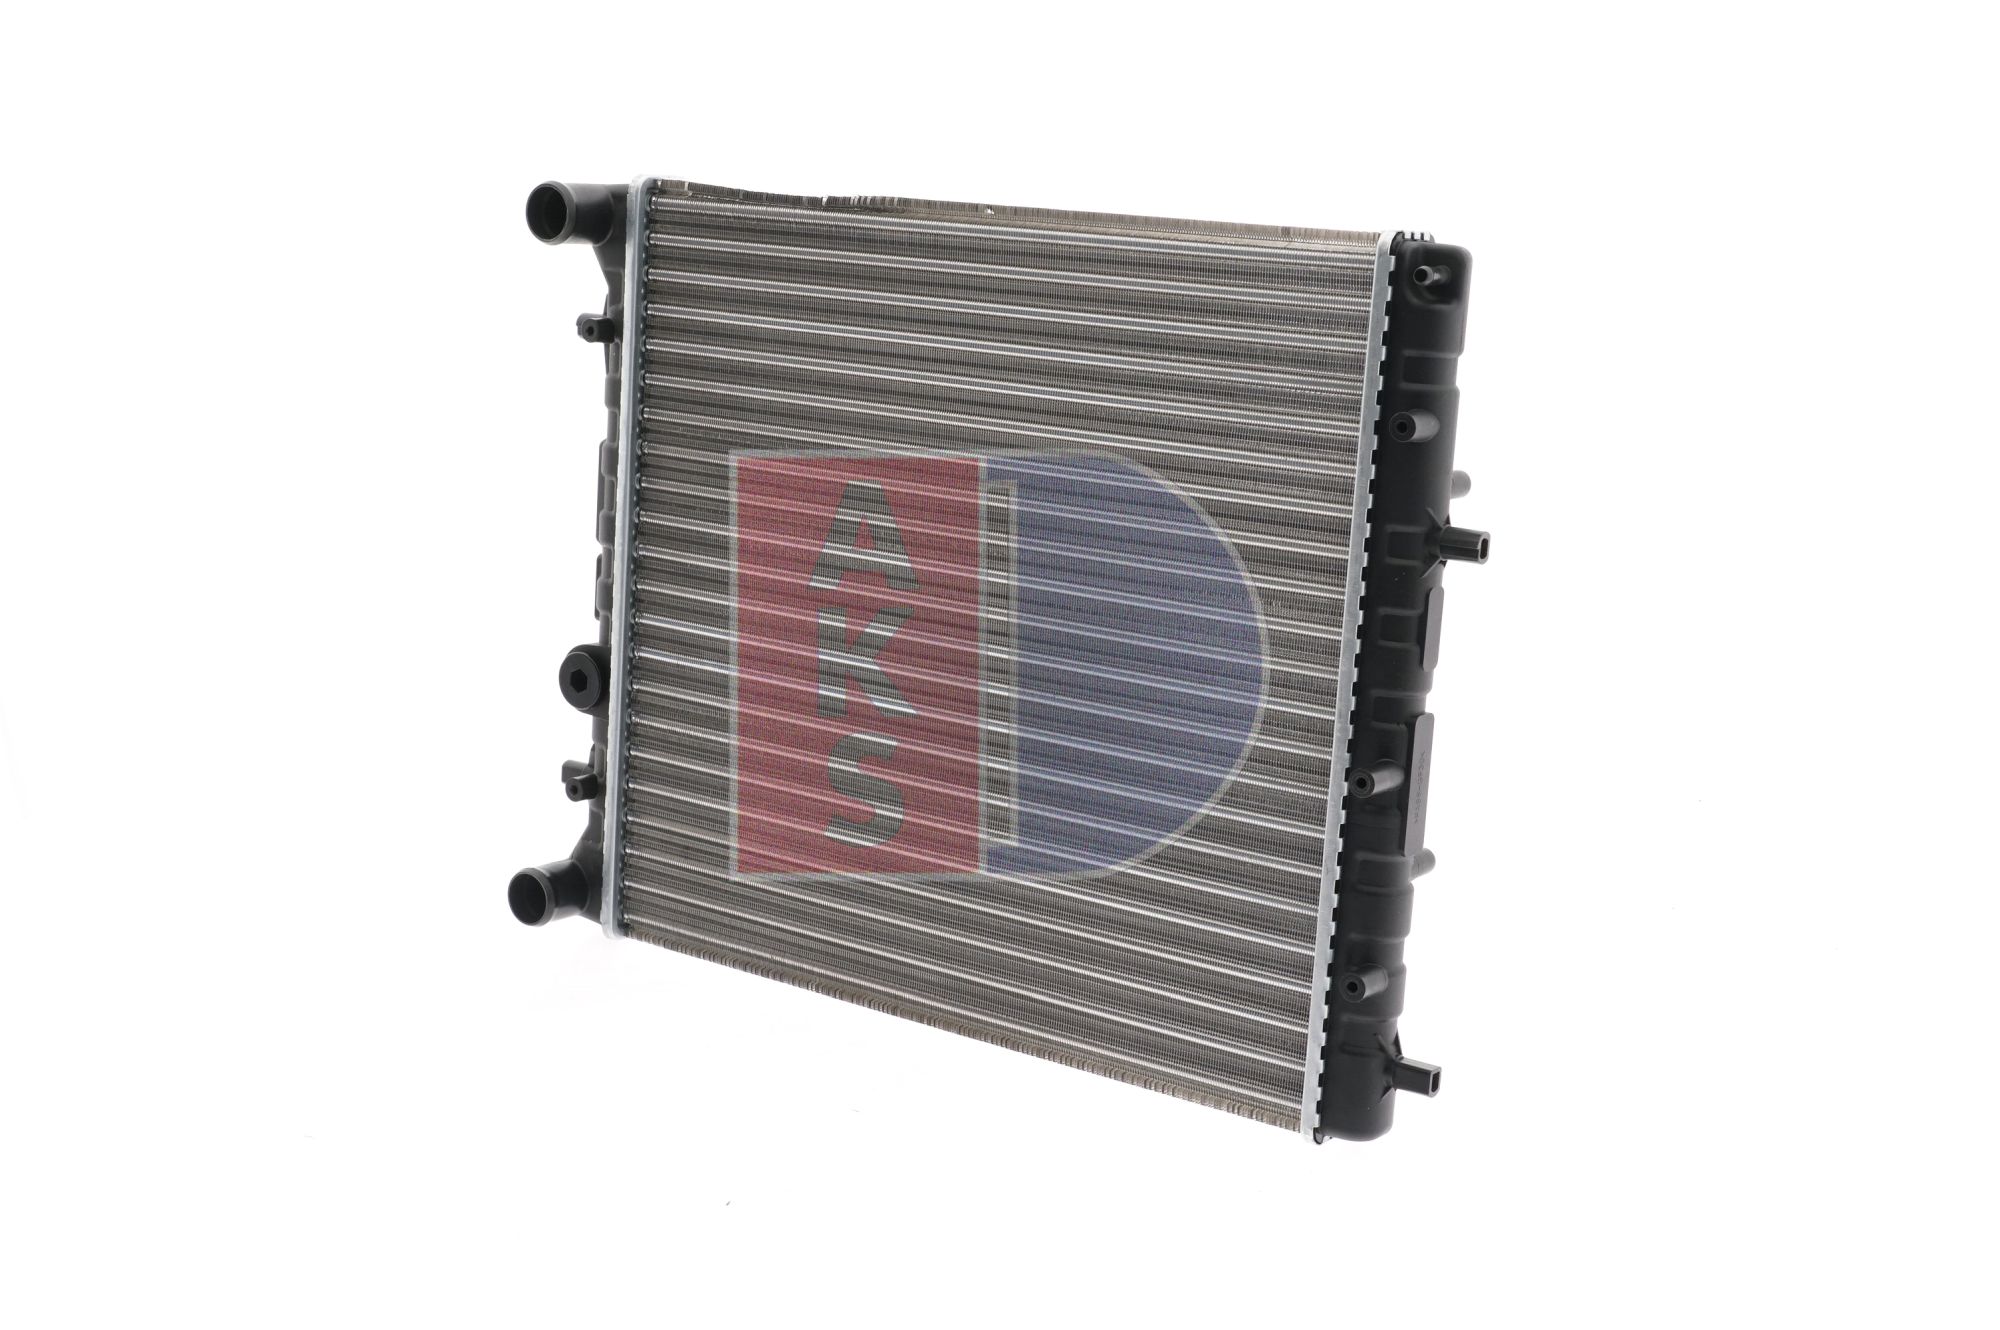 AKS DASIS 040055N Engine radiator Plastic, 428 x 411 x 23 mm, Mechanically jointed cooling fins